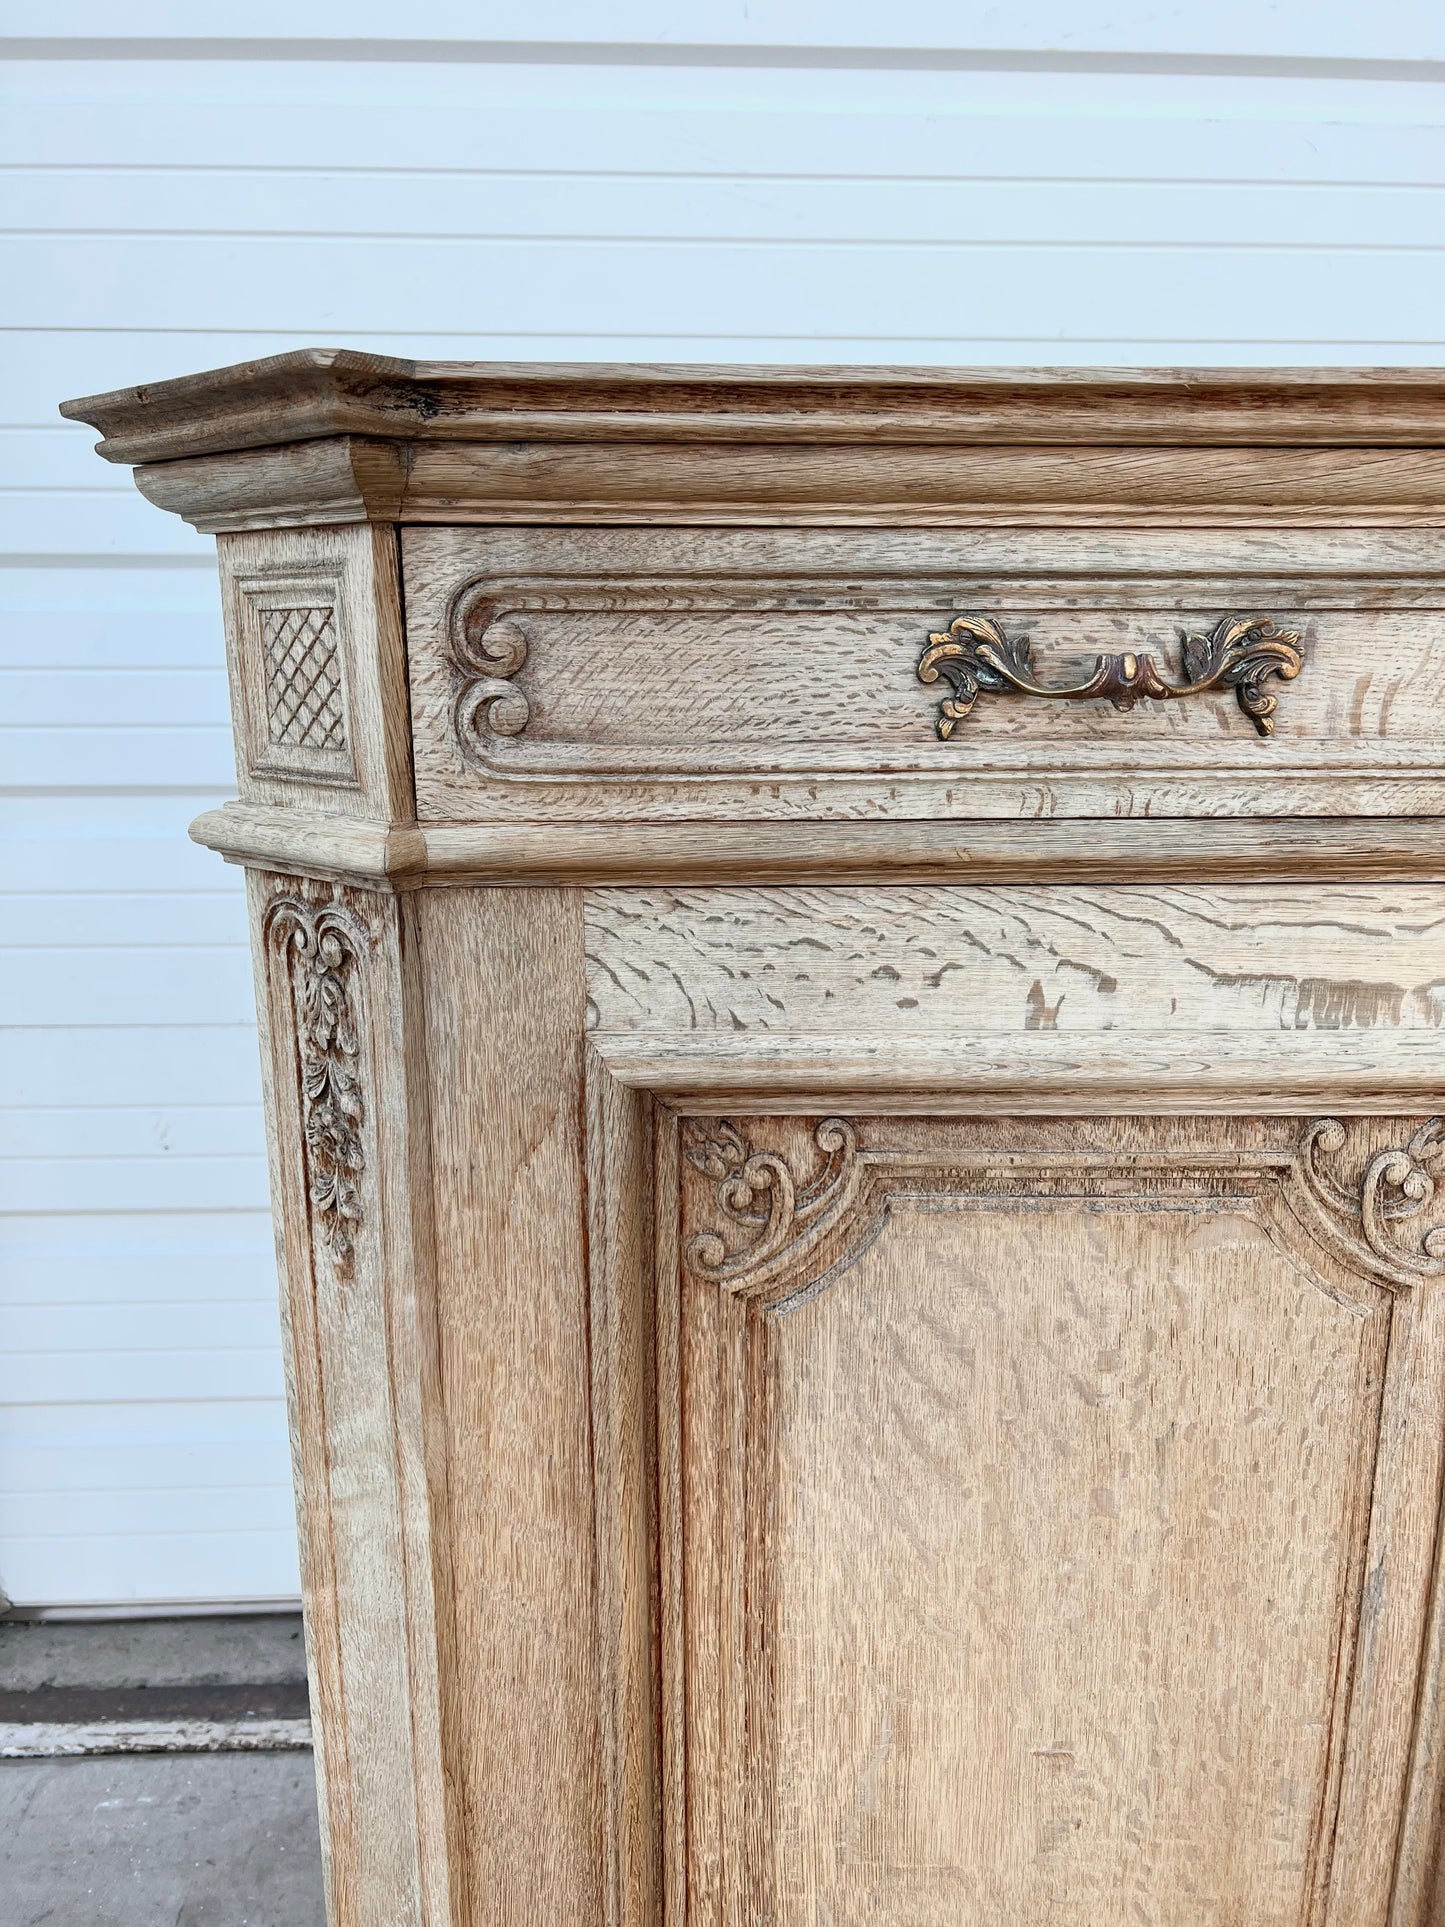 Bleached French Antique Sideboard / Buffet